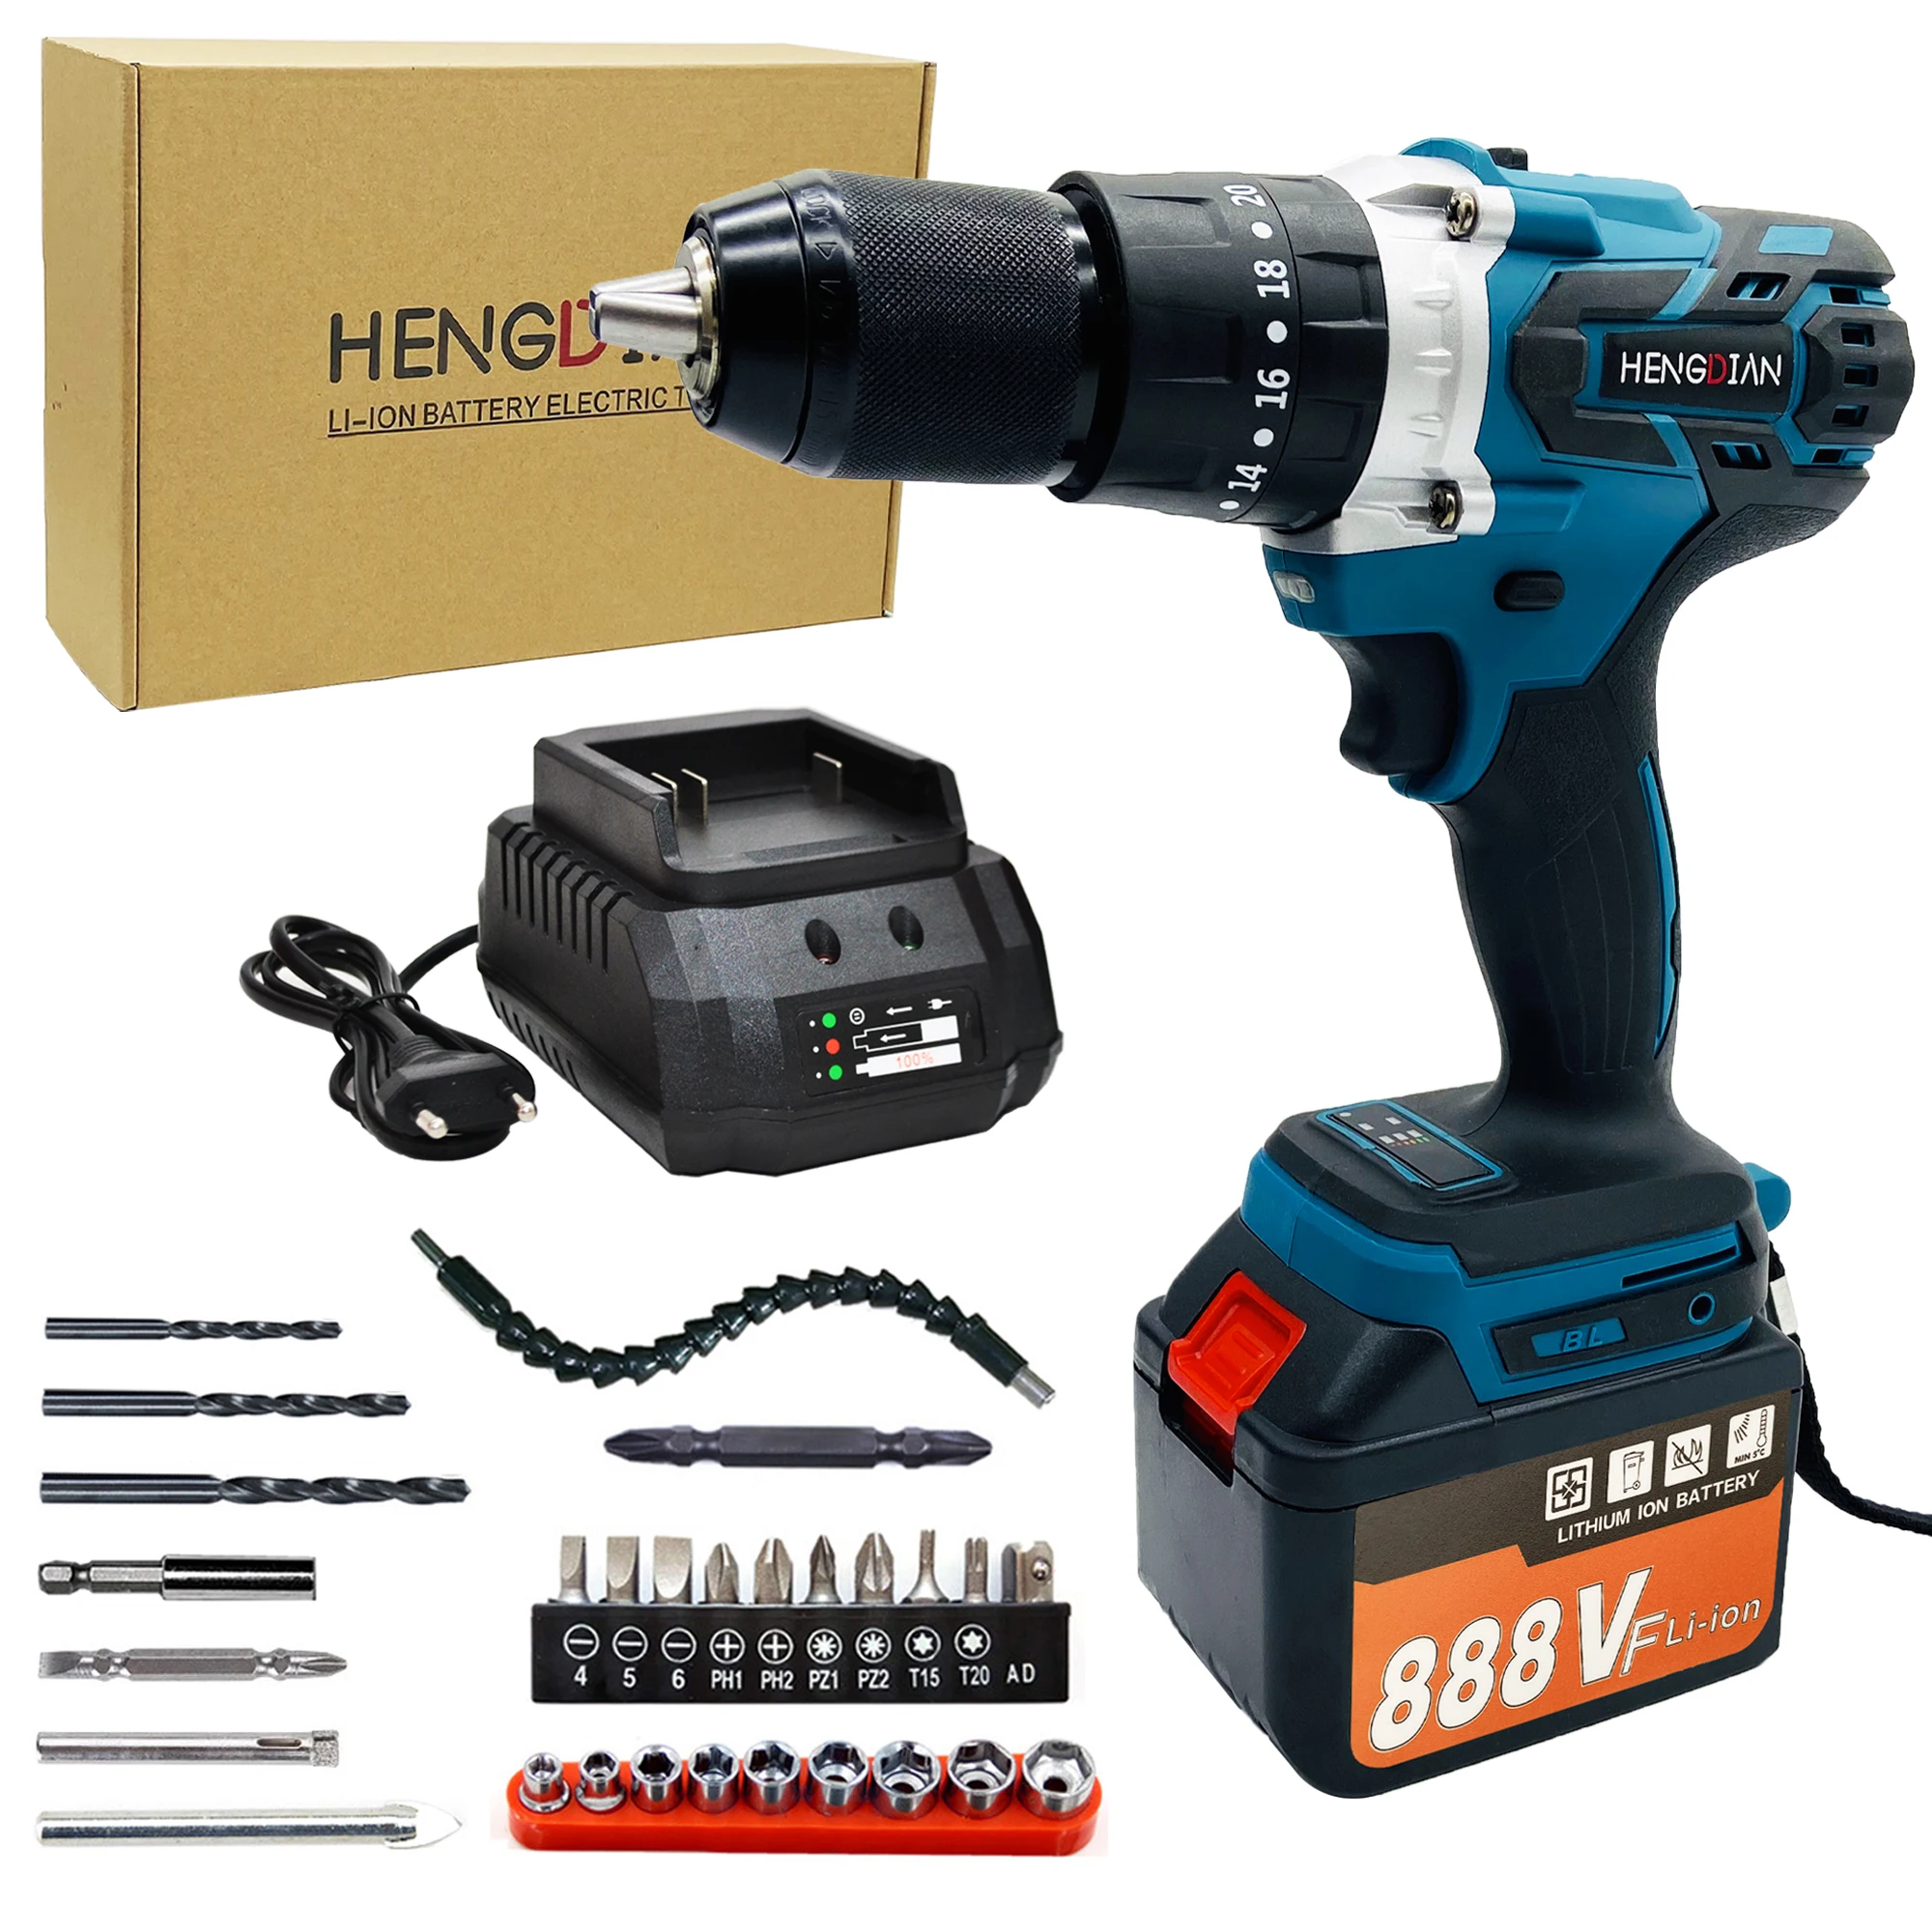 20V Brushless Battery Screwdriver Craft Drill Set Adjustable Torque Machine Impact Cordless Power Tools Electric Drill hot sale 20v battery power electric automatic screw drill machine cordless handheld impact screwdriver free after sales service